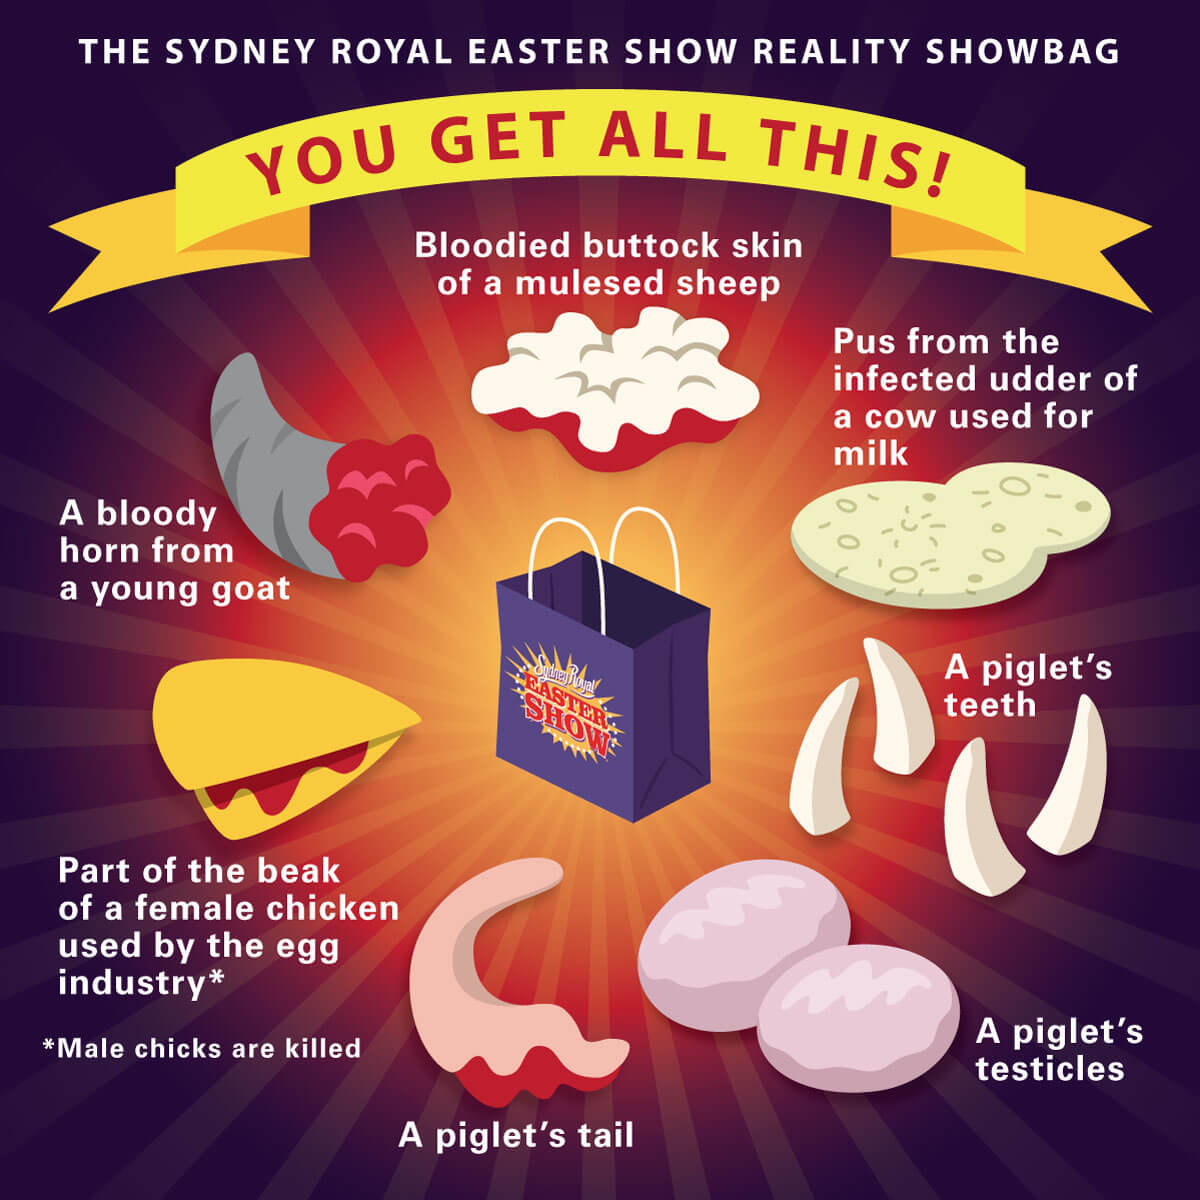 If Sydney Easter Showbags Told the Gruesome Truth